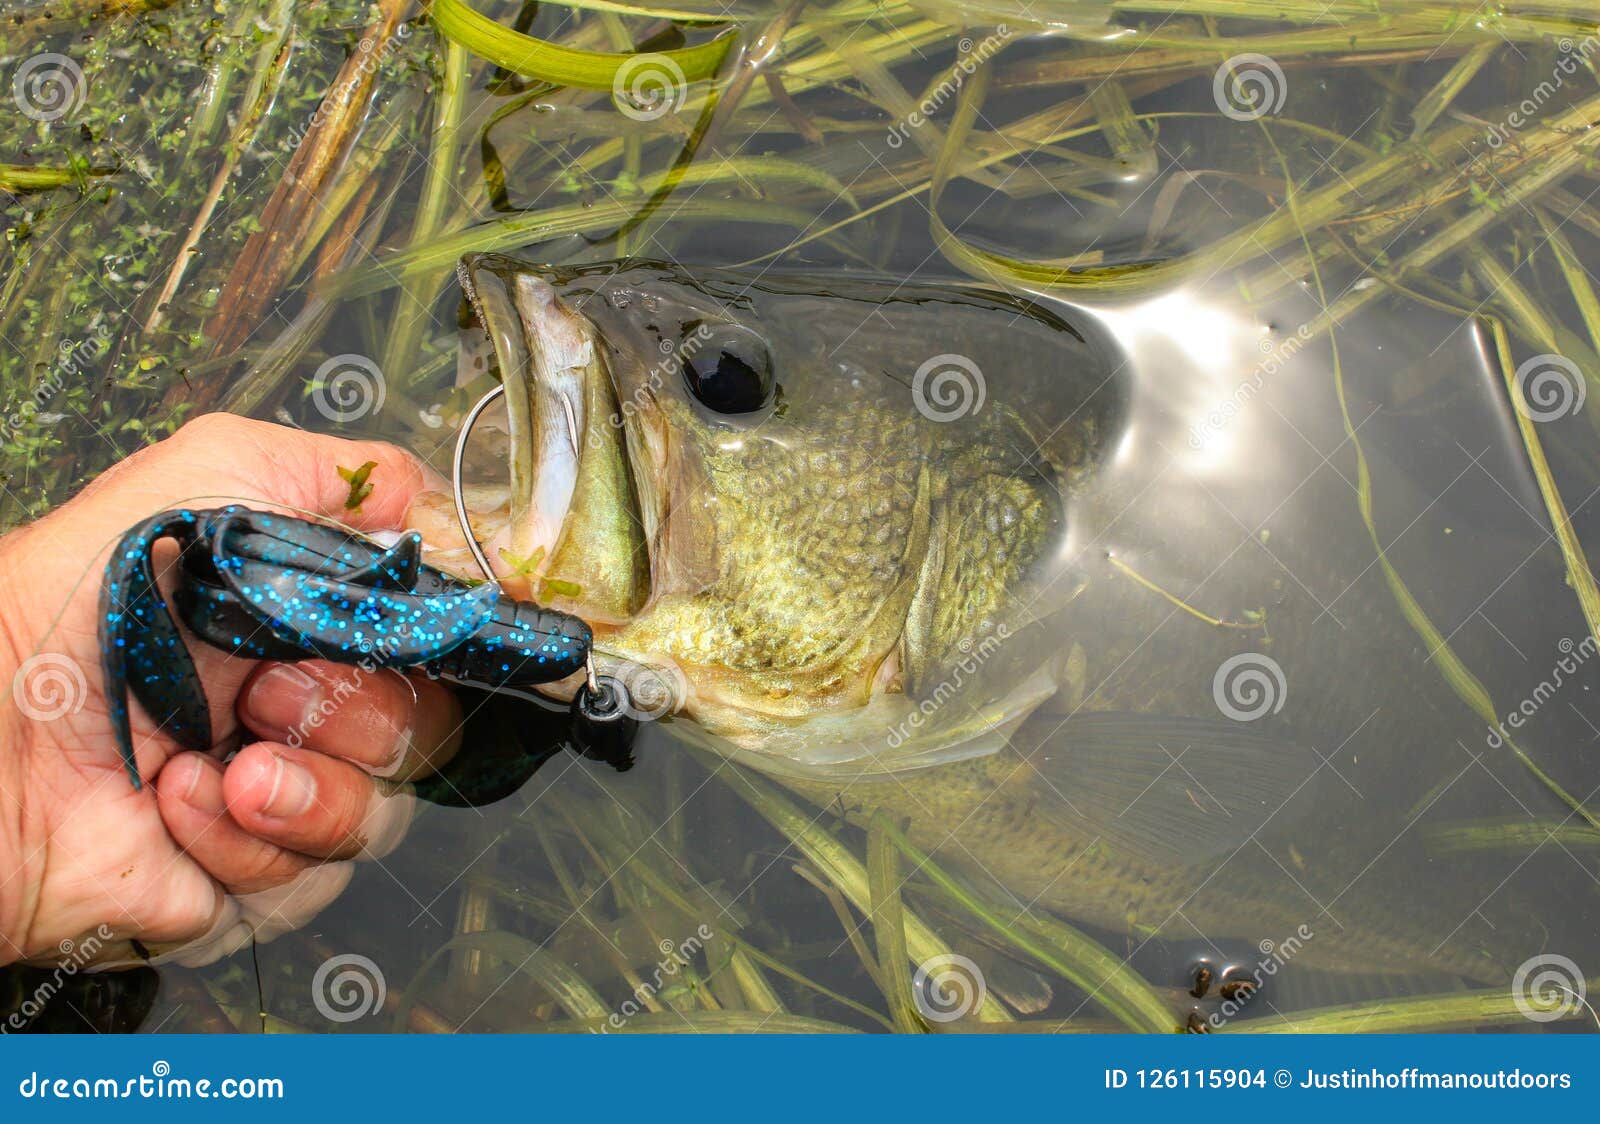 https://thumbs.dreamstime.com/z/man-lips-large-mouth-bass-caught-plastic-lure-lipped-fisherman-which-fishing-126115904.jpg